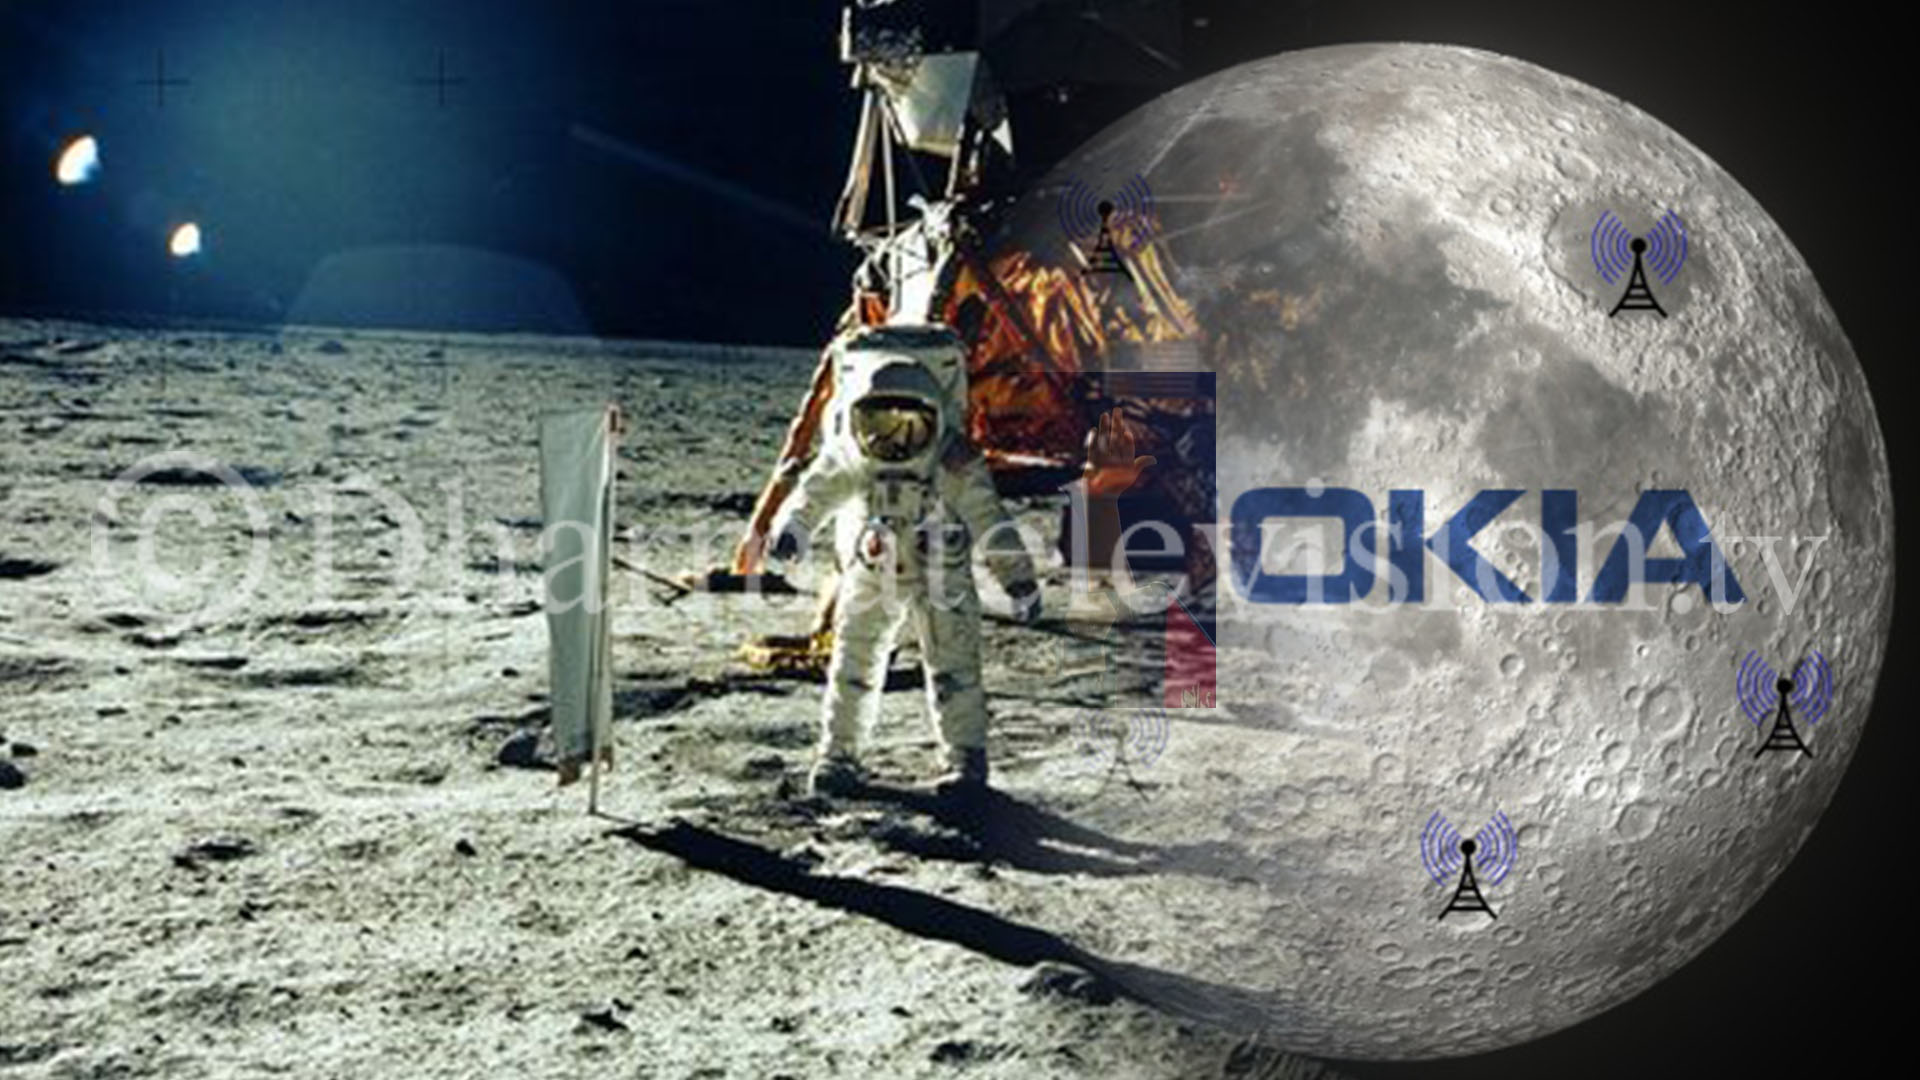 Nokia bags $14.1 Million contract to set up a 4G network on Moon